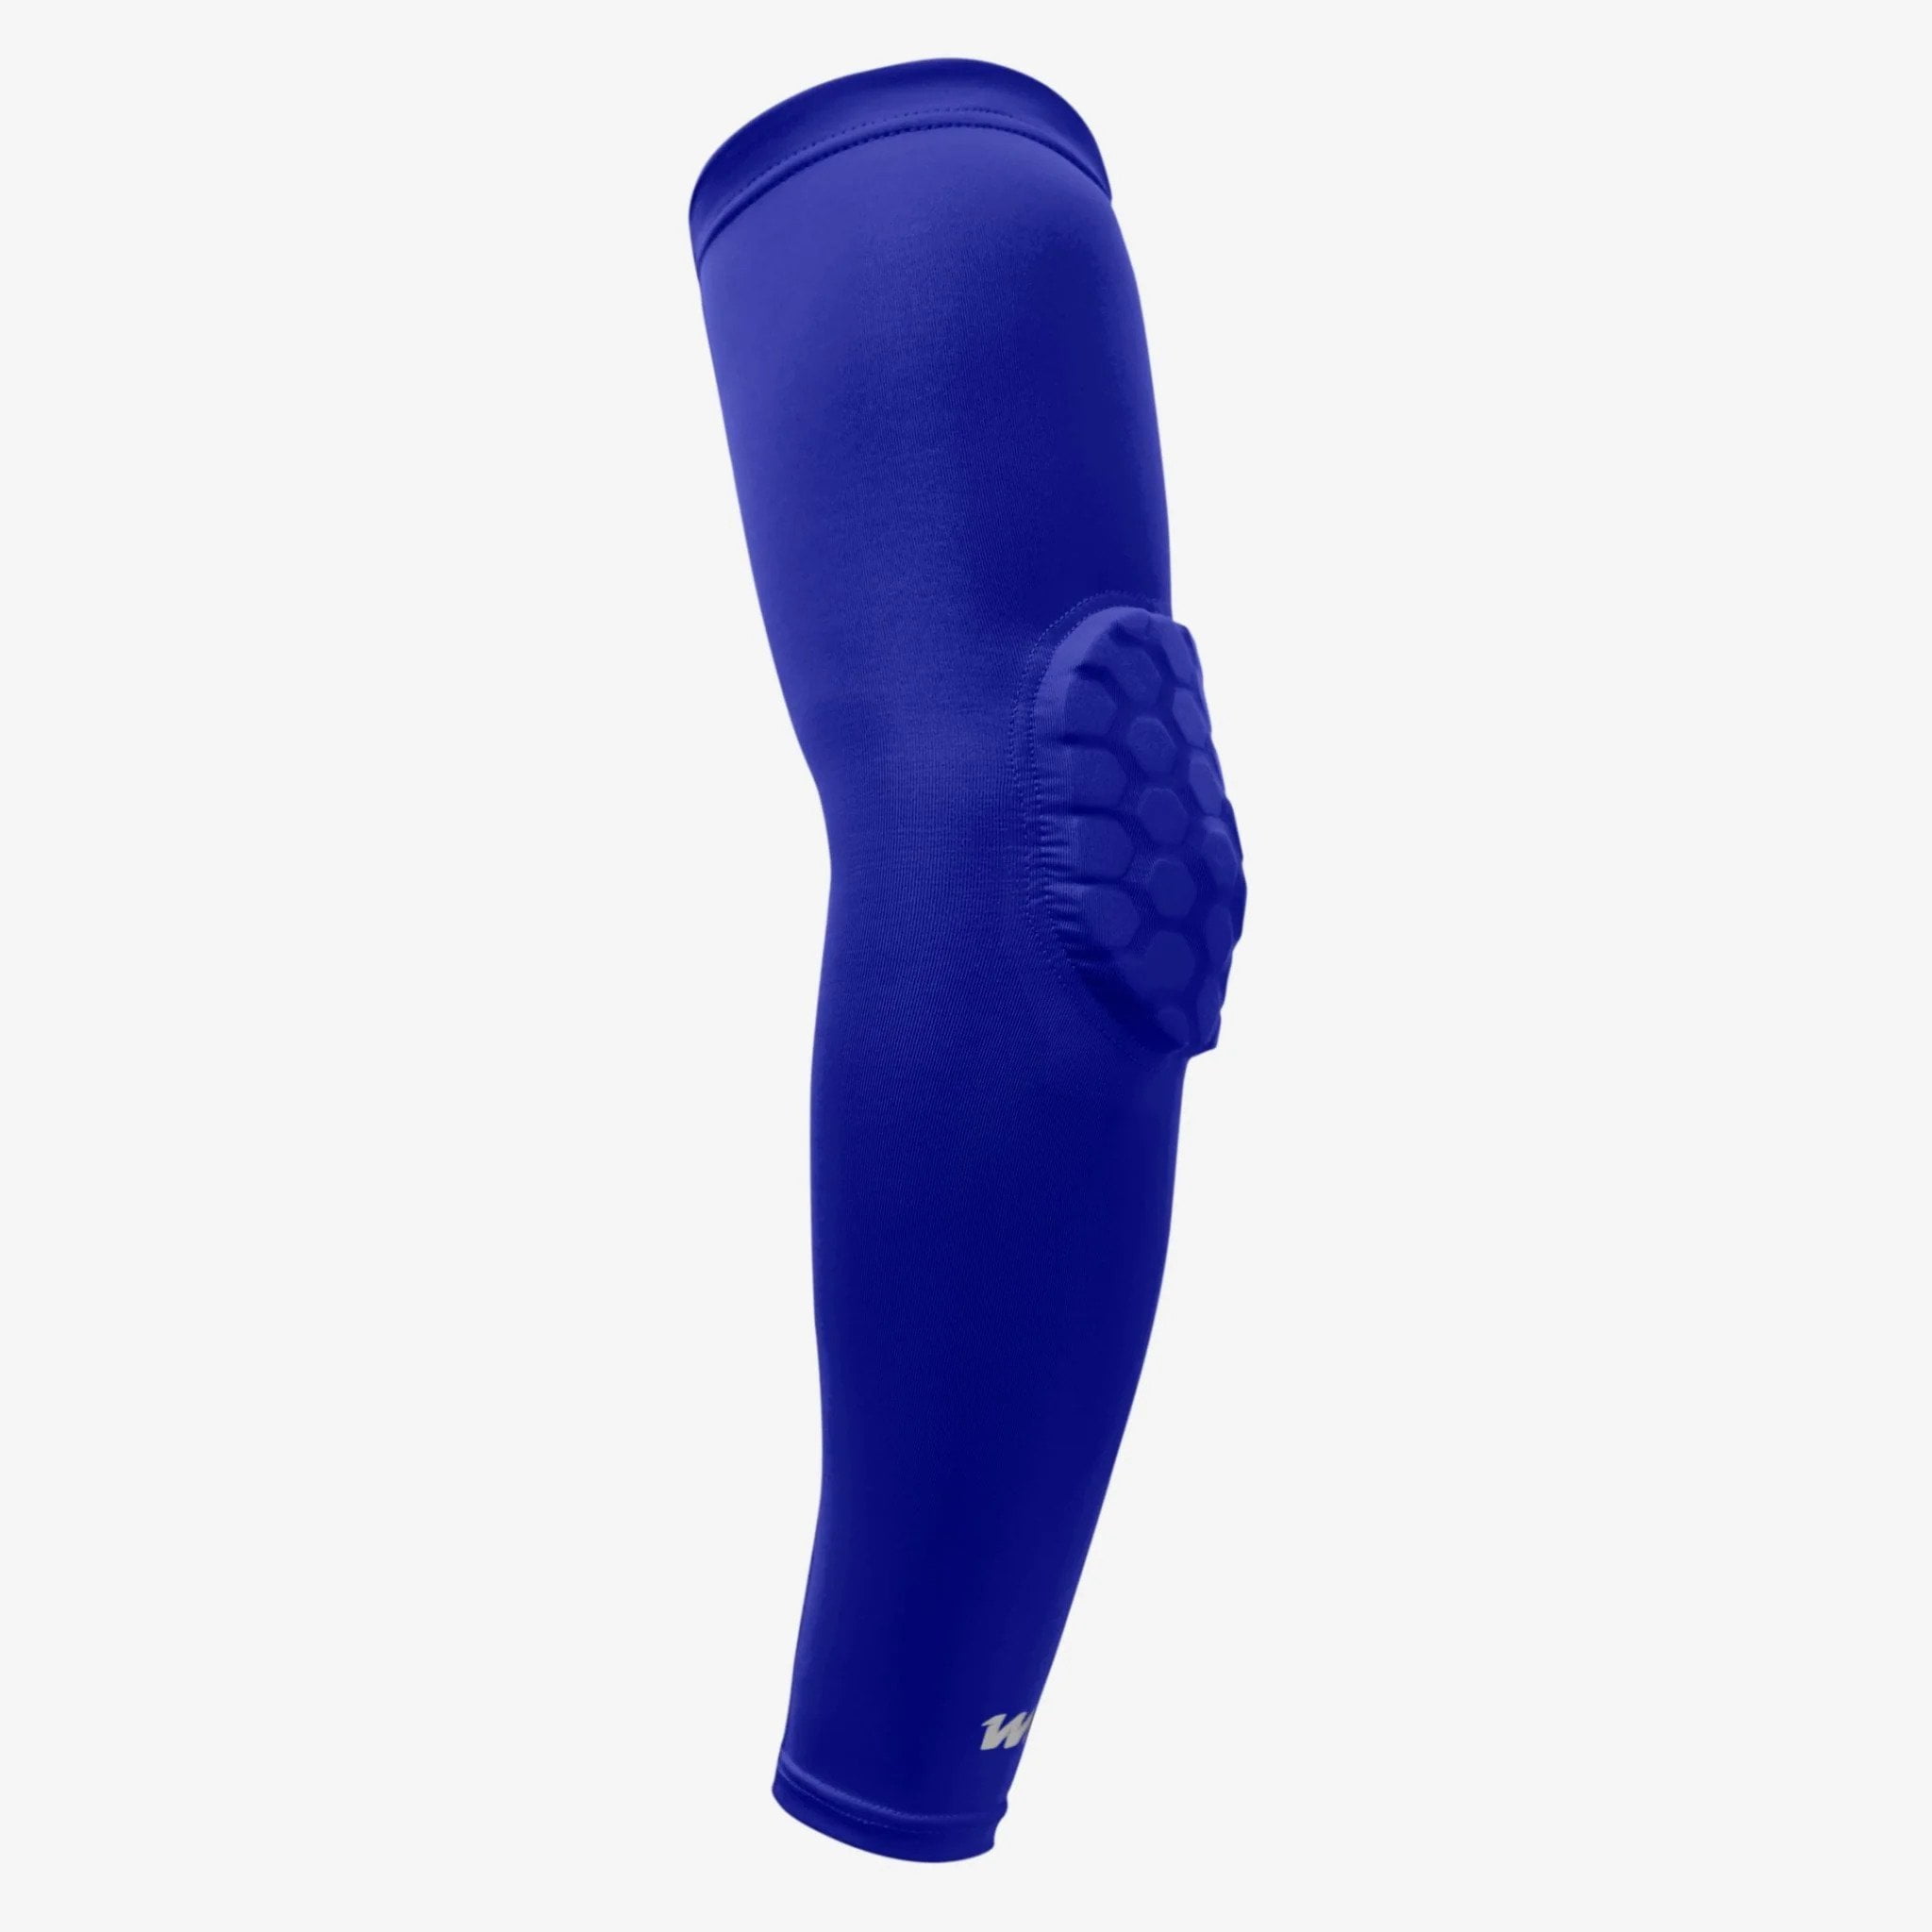 Hue Navy Blue One Size Fits All Football Arm Sleeve